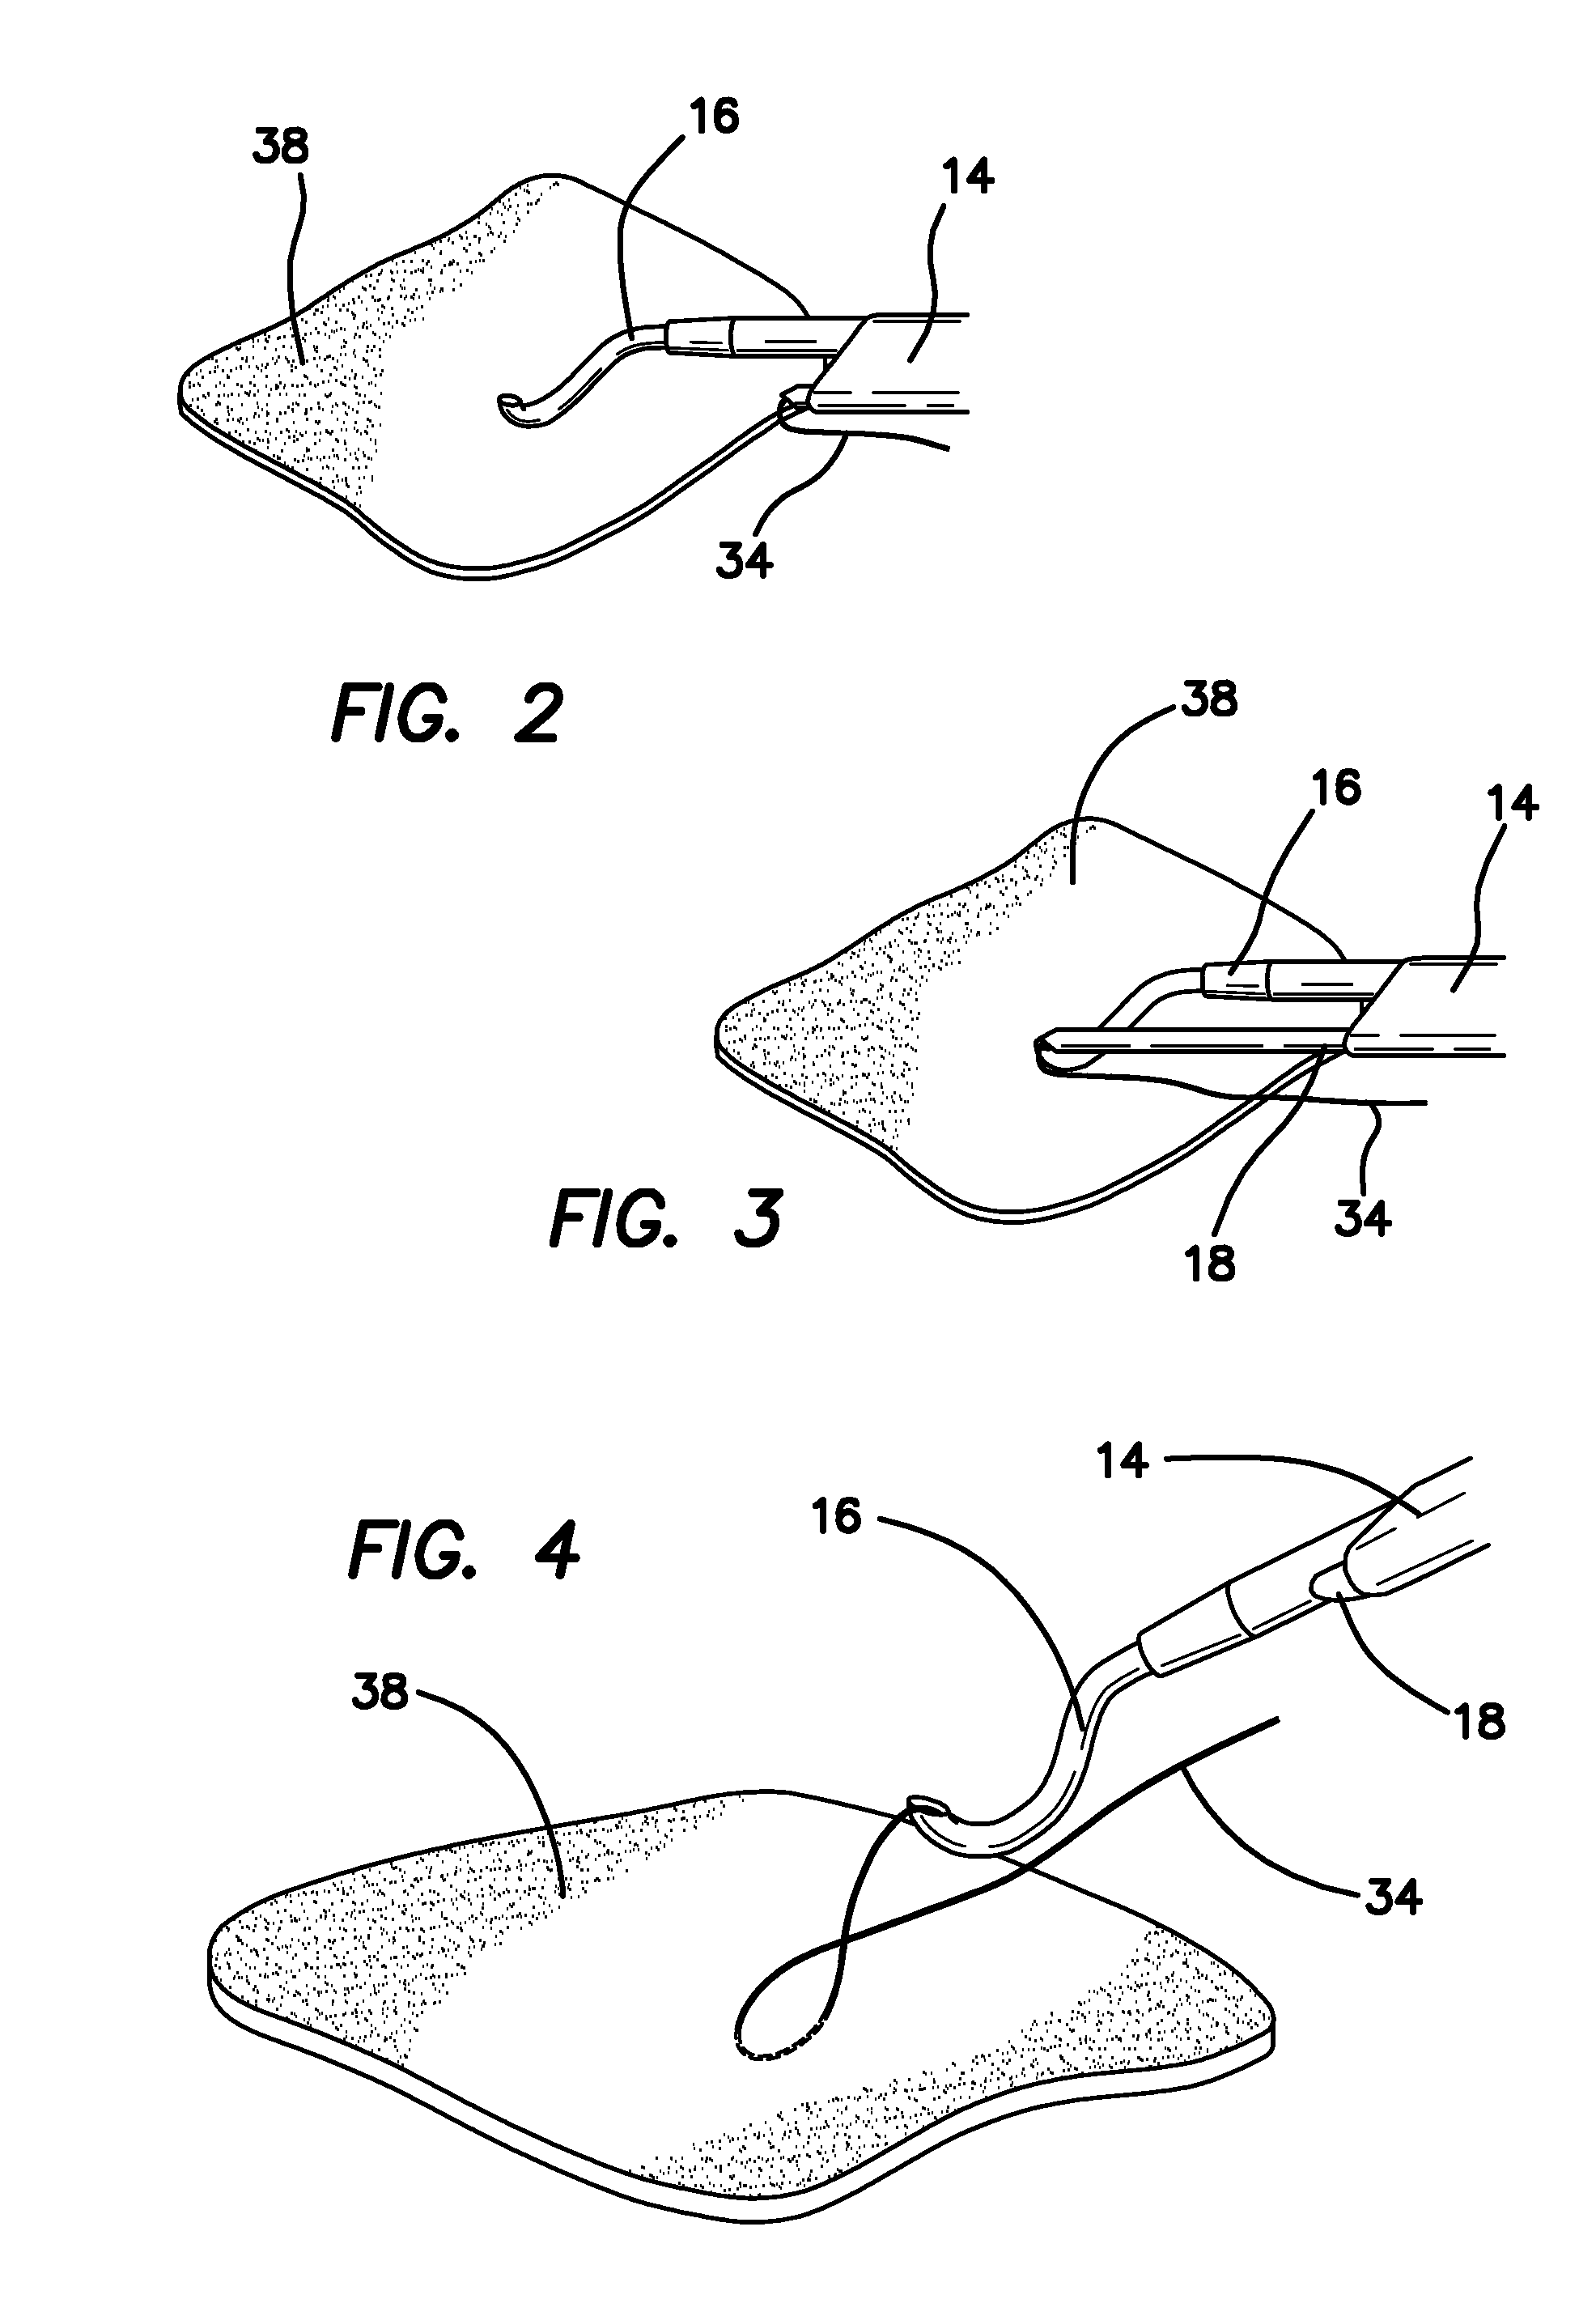 Arthroscopic suture passing devices and methods